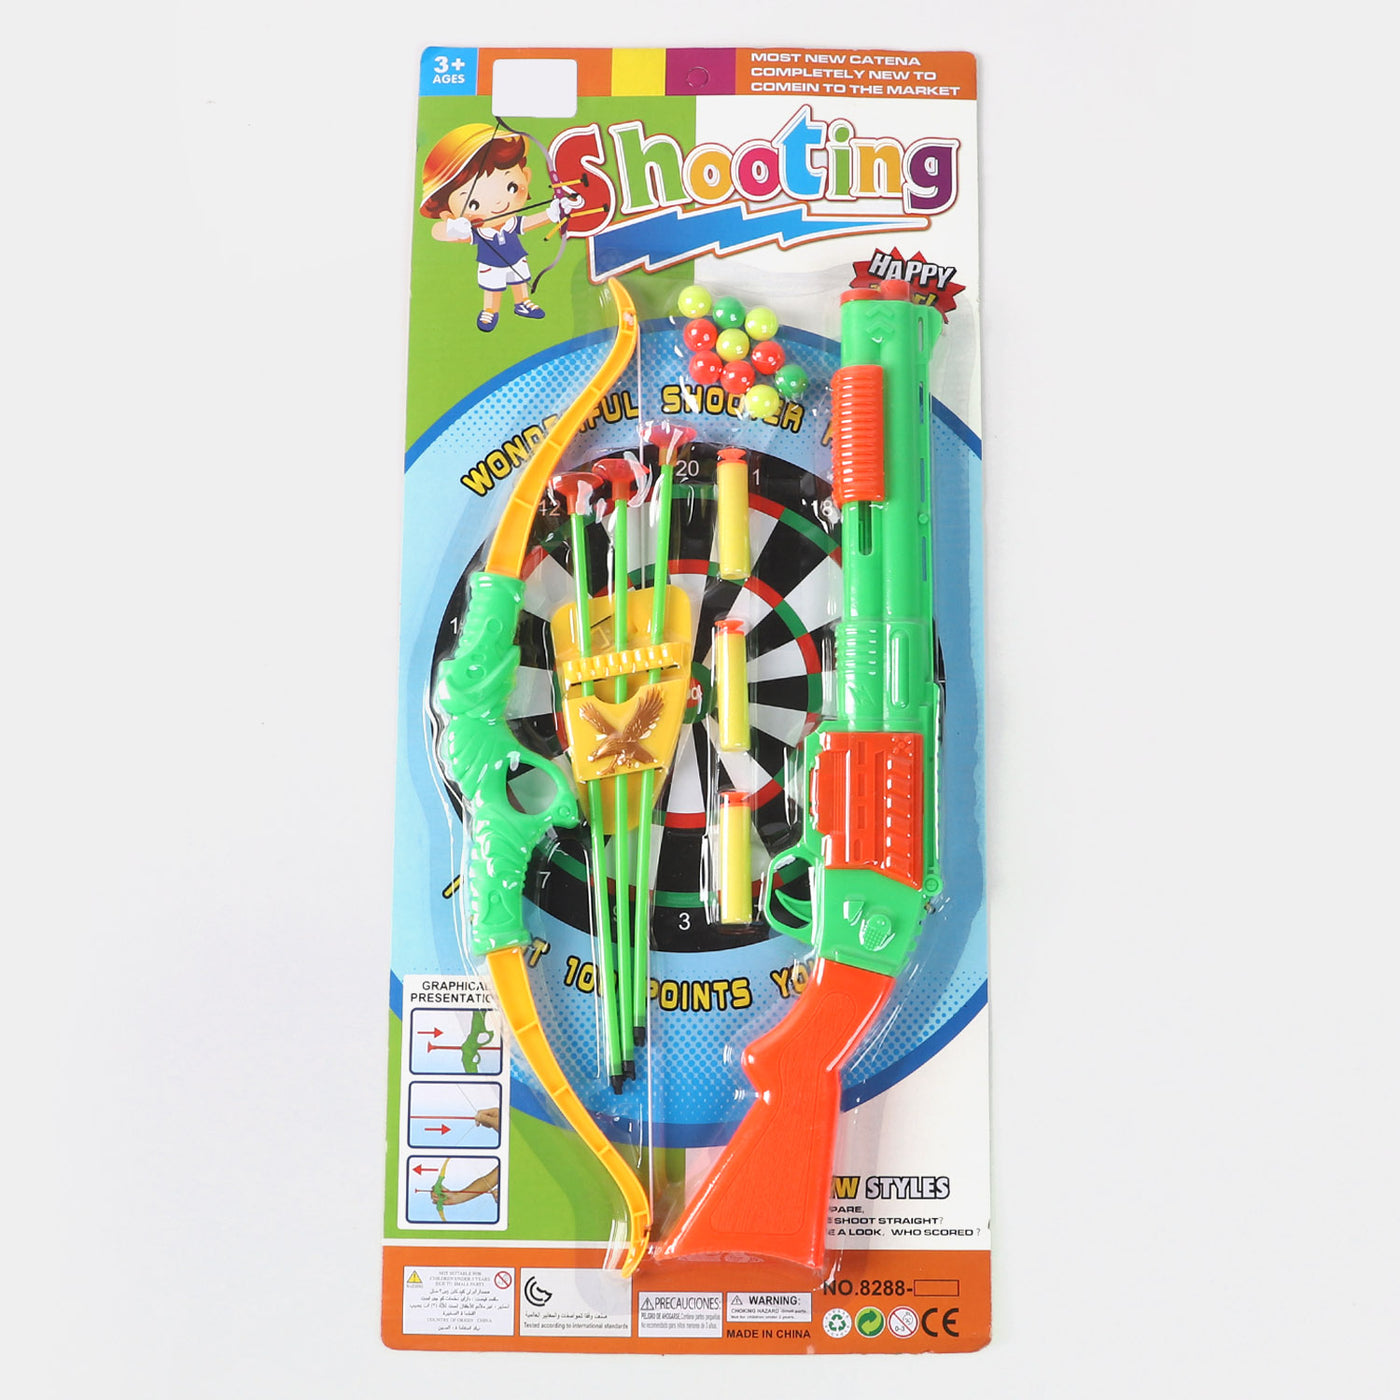 Archery Set With Target Toy For Kids